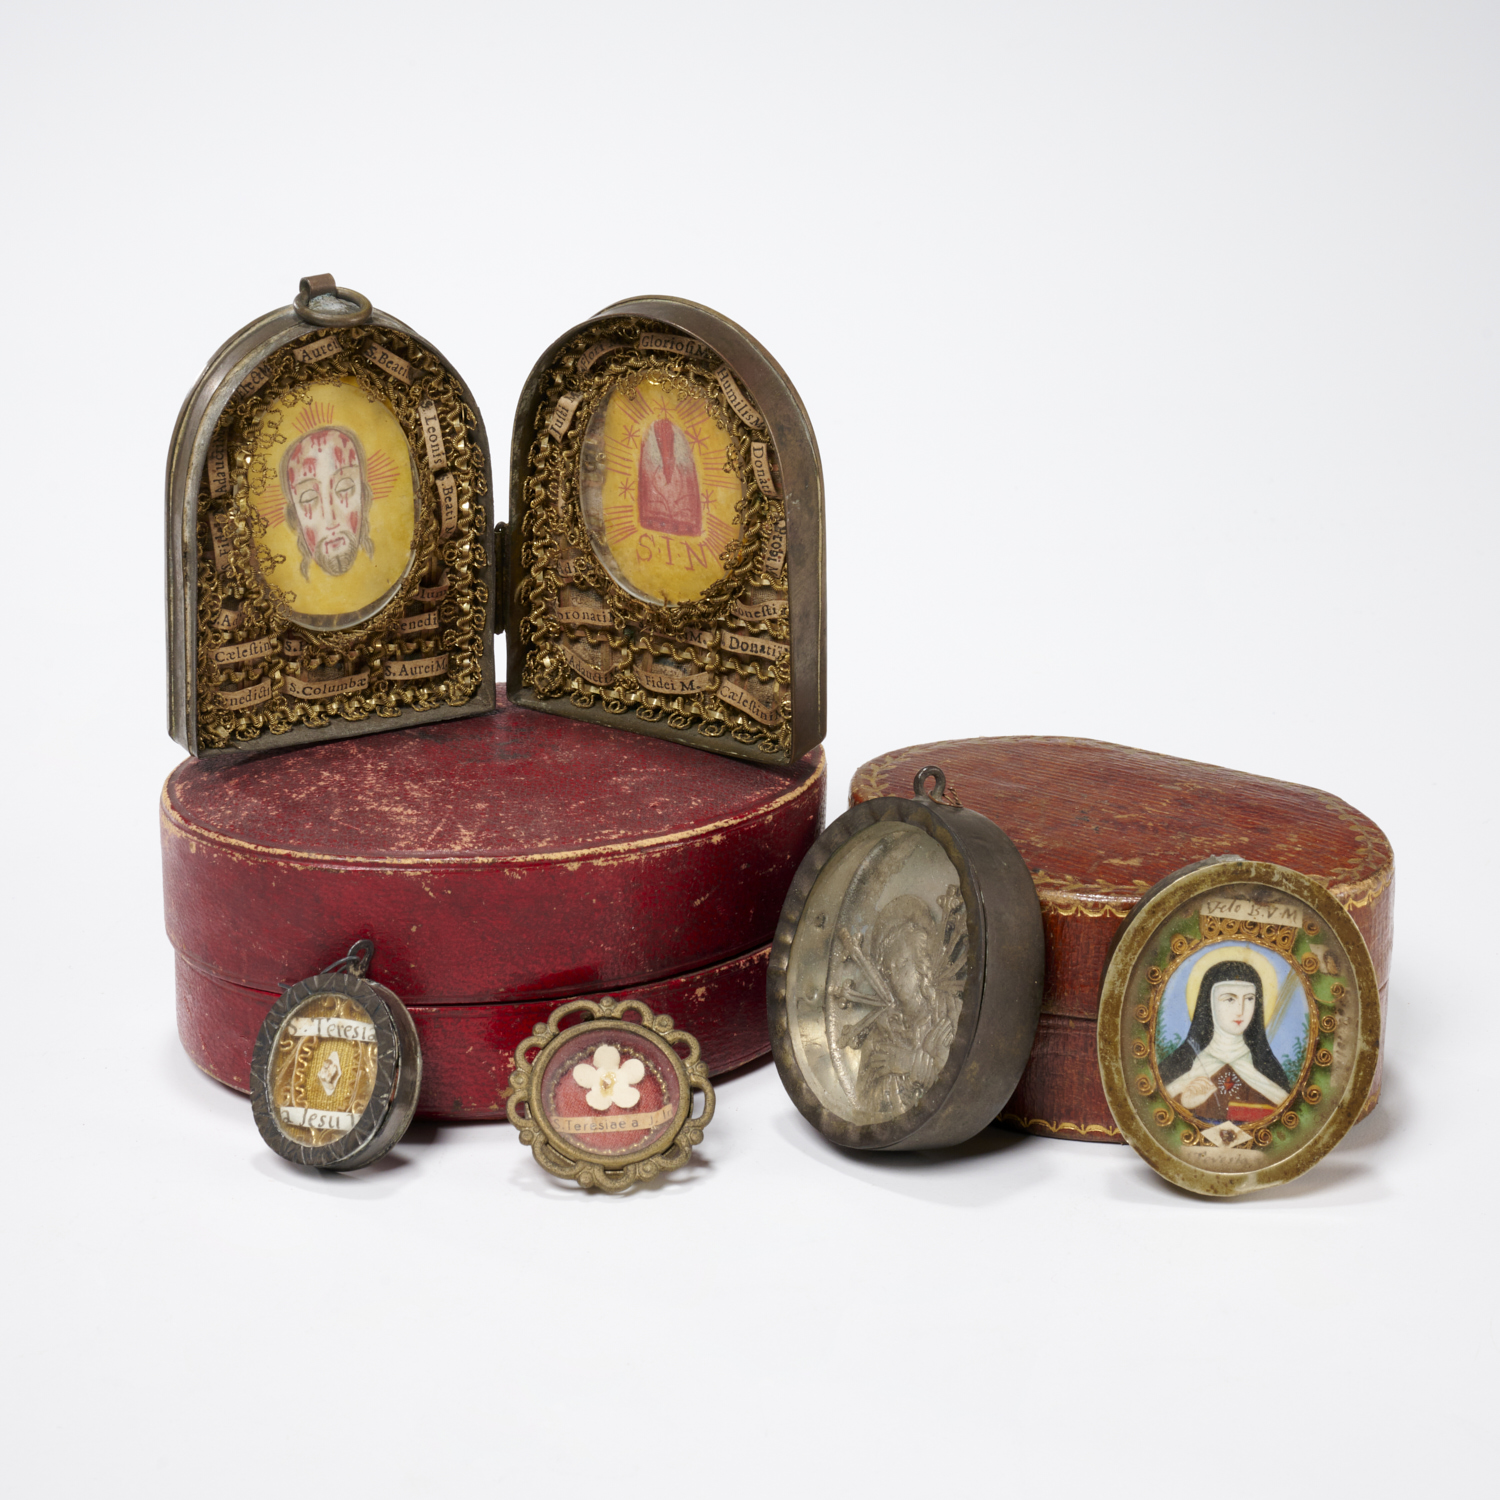 (5) CONTINENTAL RELIQUARIES AND